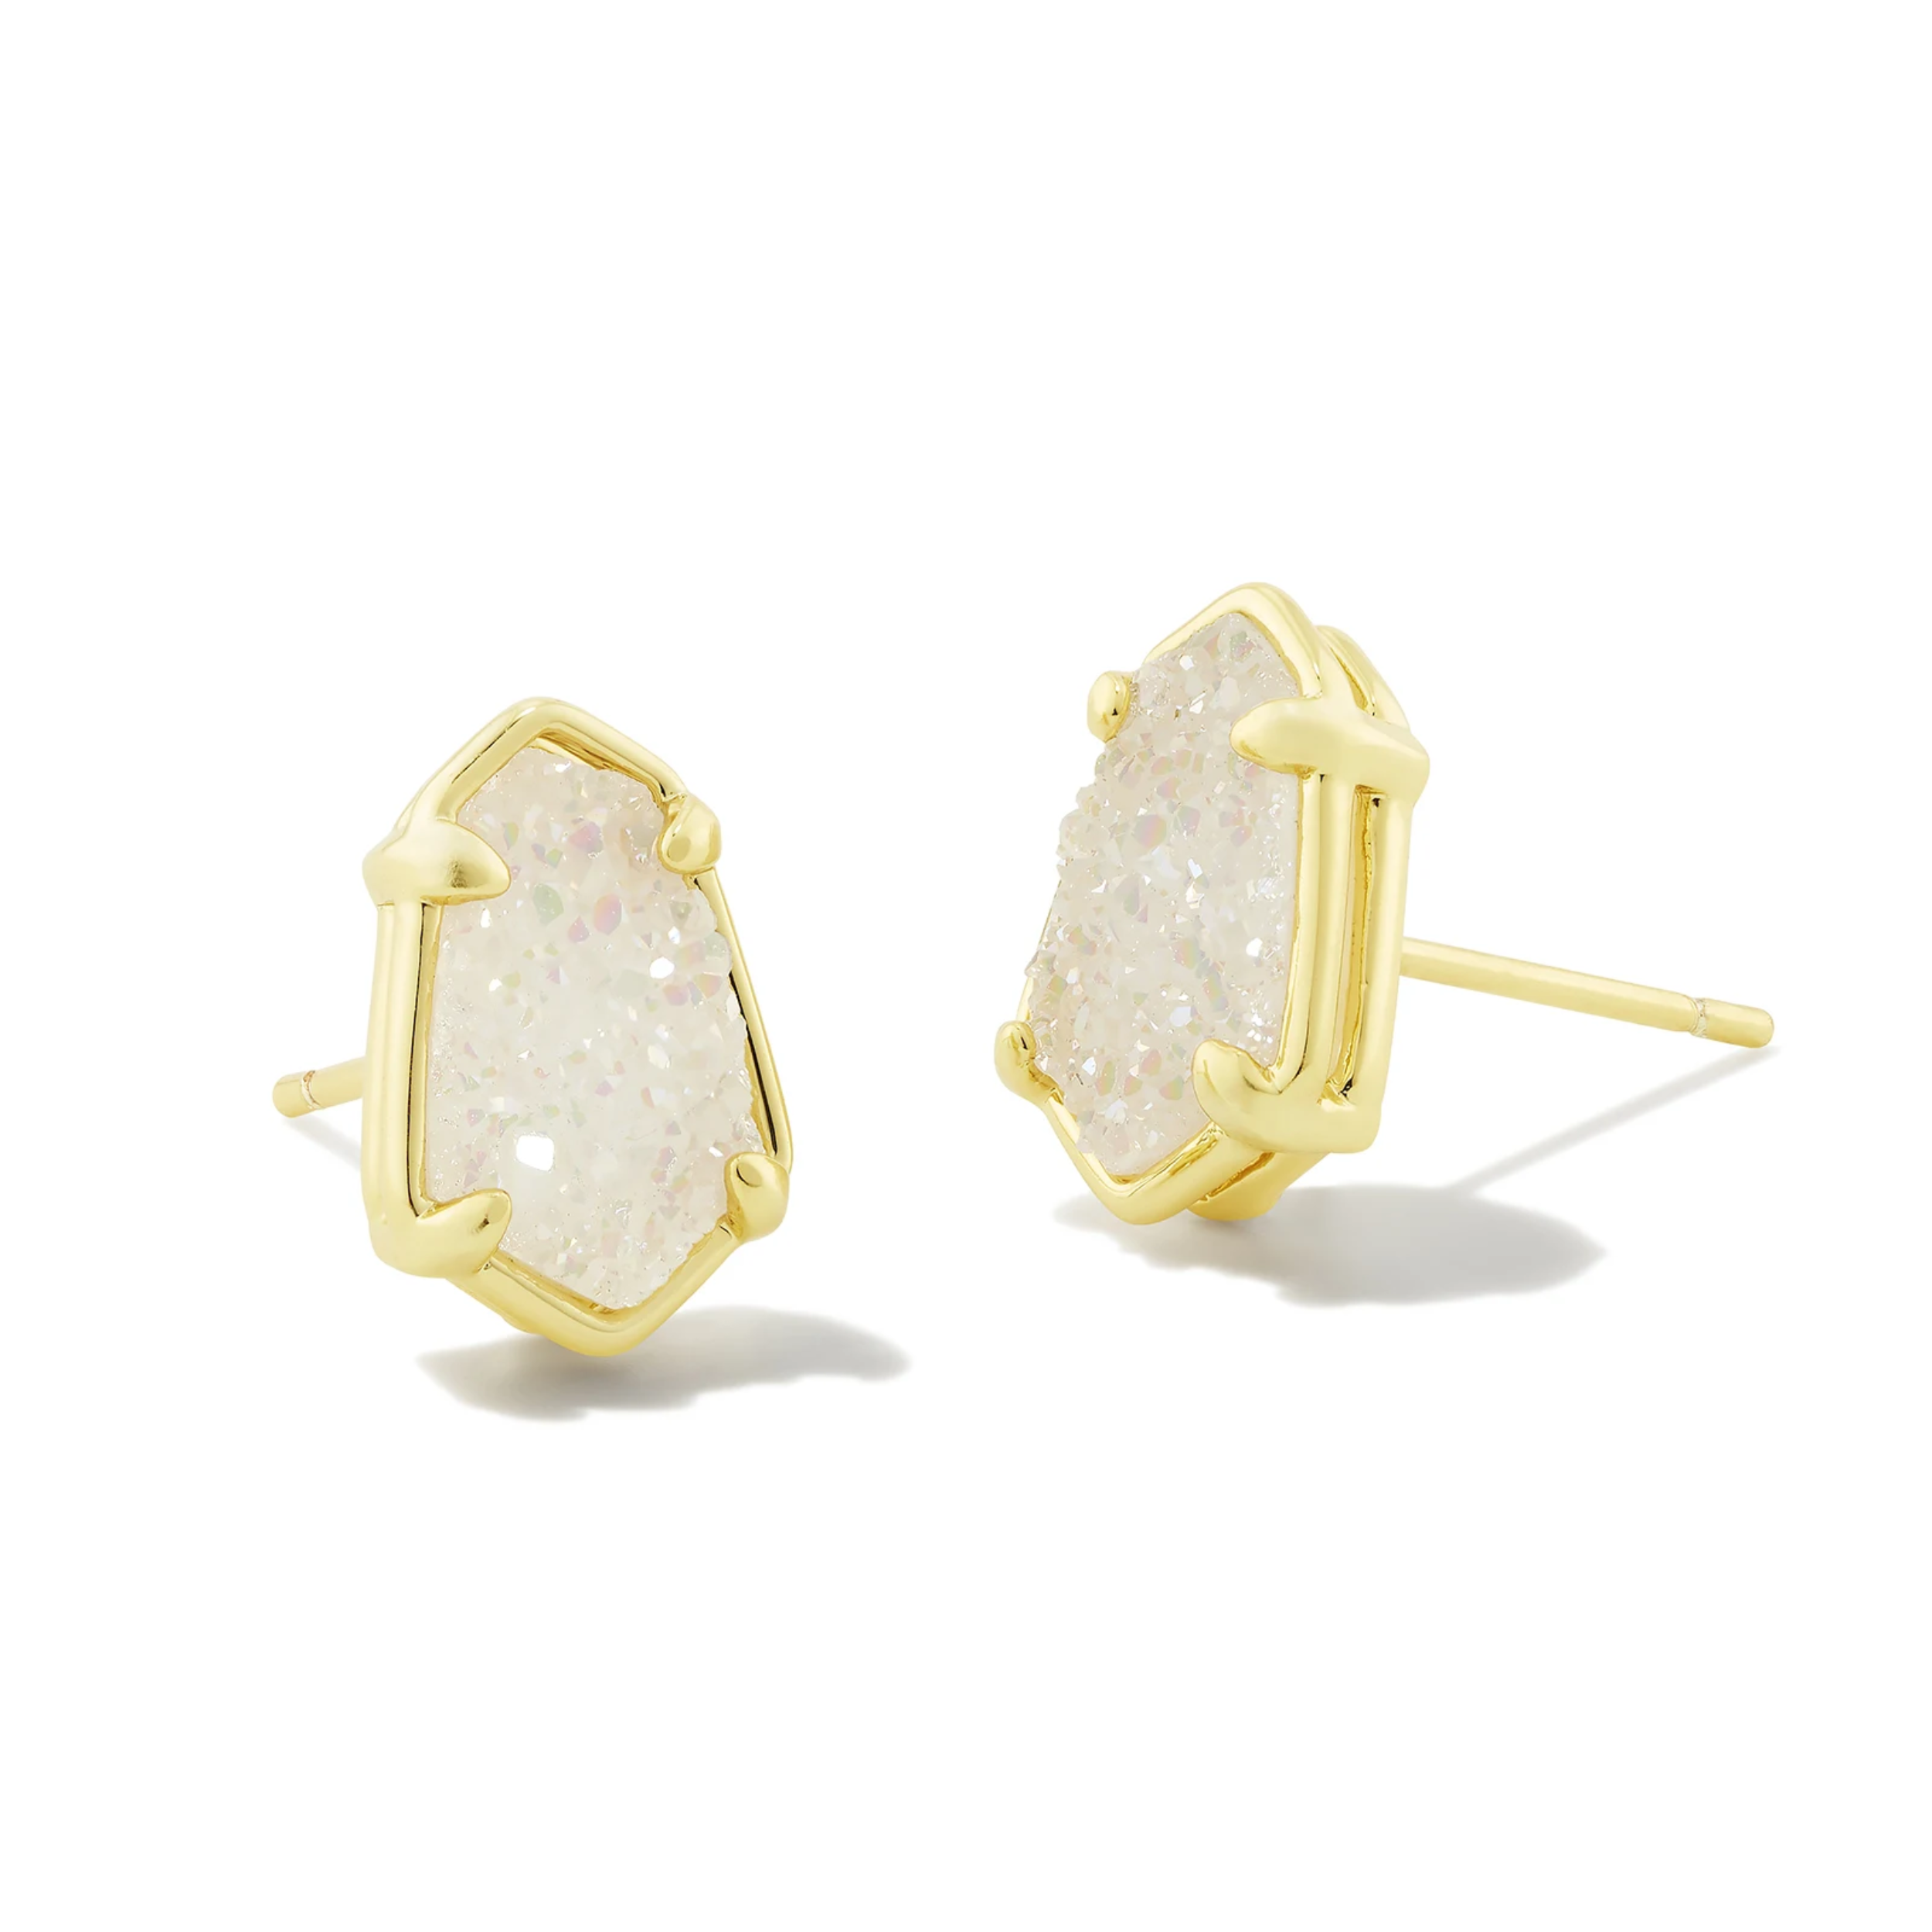 These Alexandria Gold Stud Earrings in Iridescent Drusy by Kendra Scott are pictured on a white background.